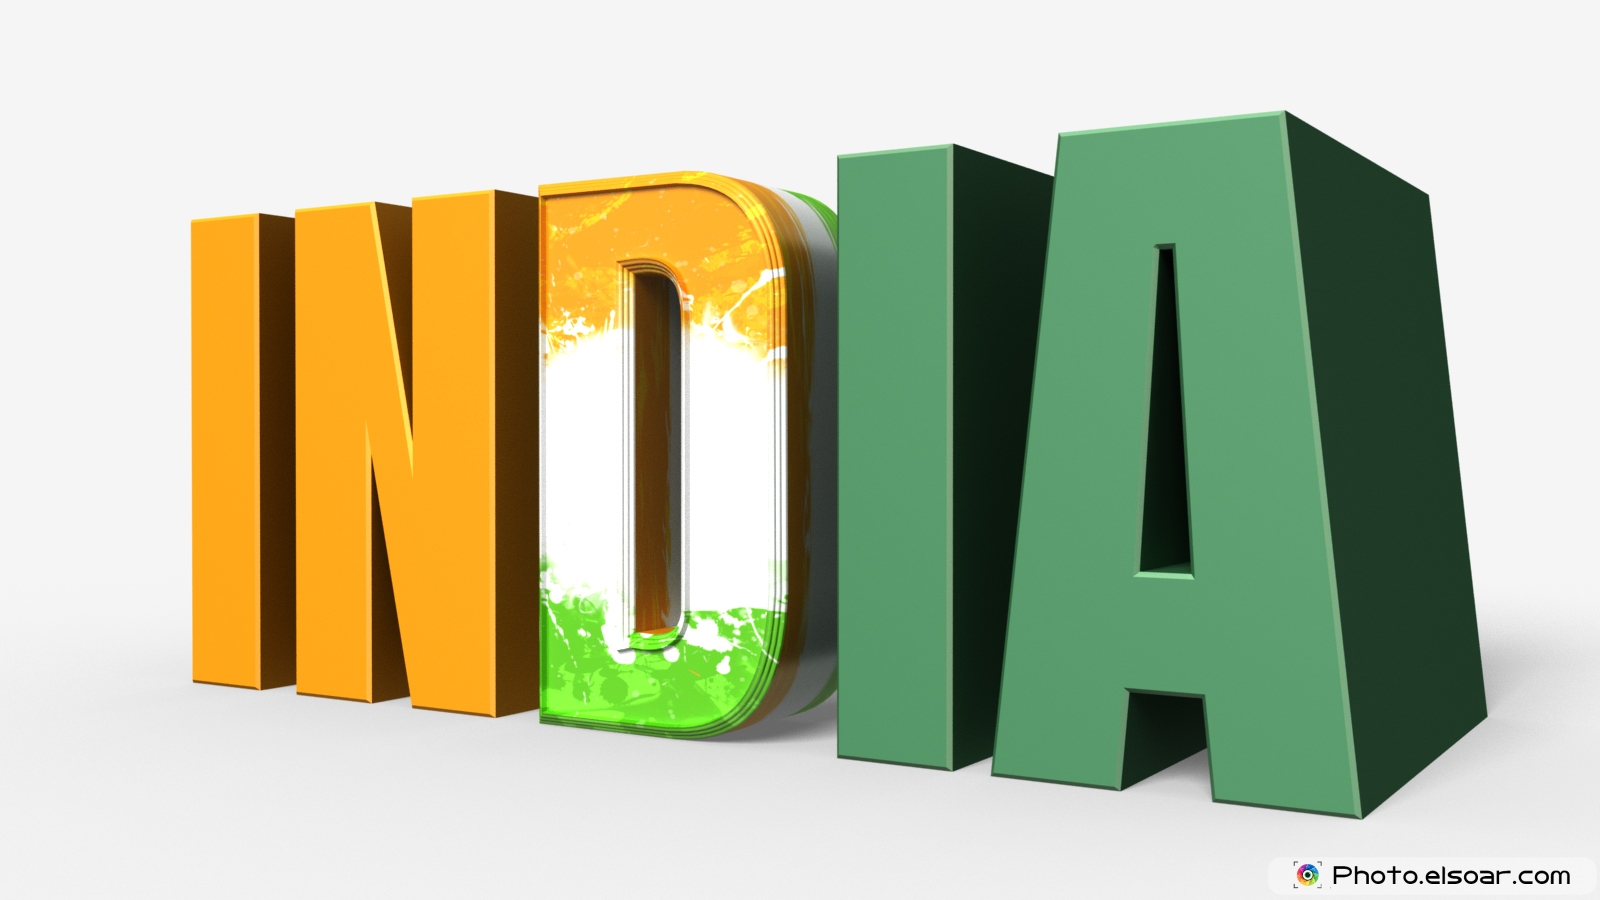 Say Proud To Be An Indian With Image Wallpaper